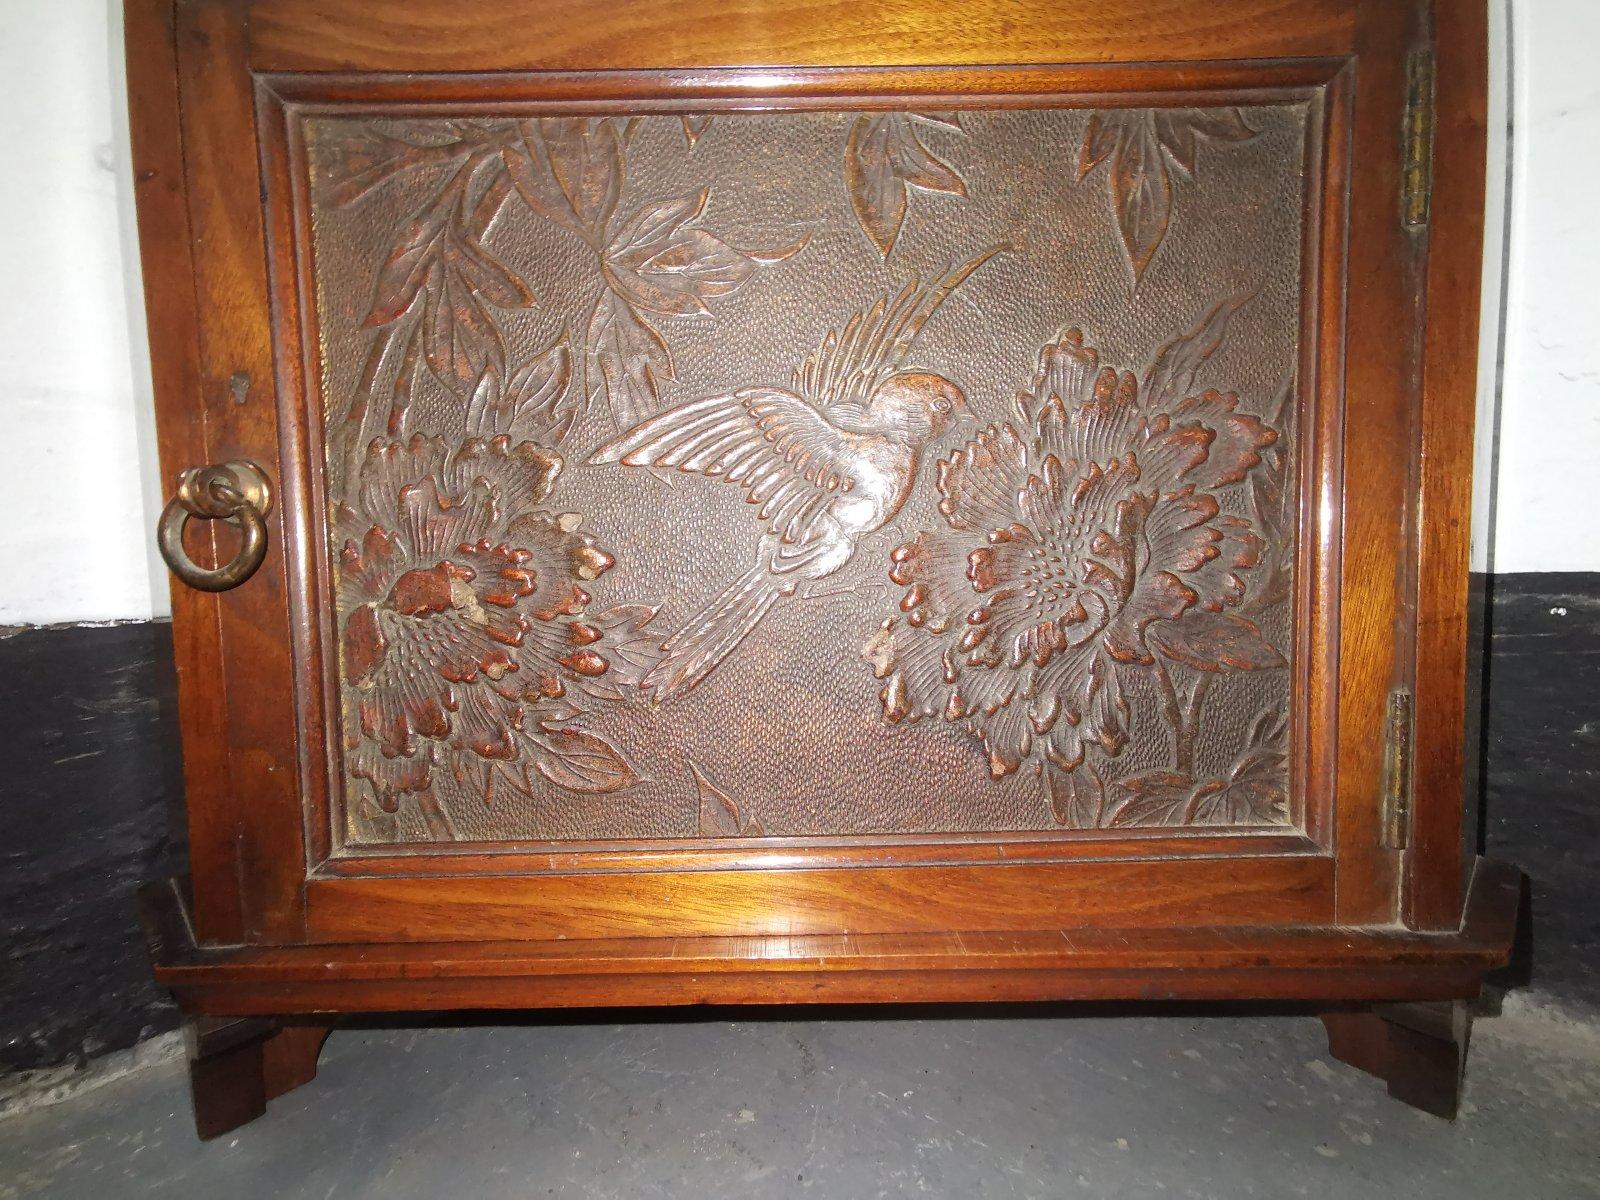 Liberty & Co.
A rare English Aesthetic Movement Walnut corner cupboard with embossed leather panel to the door, depicting a bird hovering above chrysanthemum, the door with Liberty's typical brass ring pull handle.
Height 24 inches.
Front width